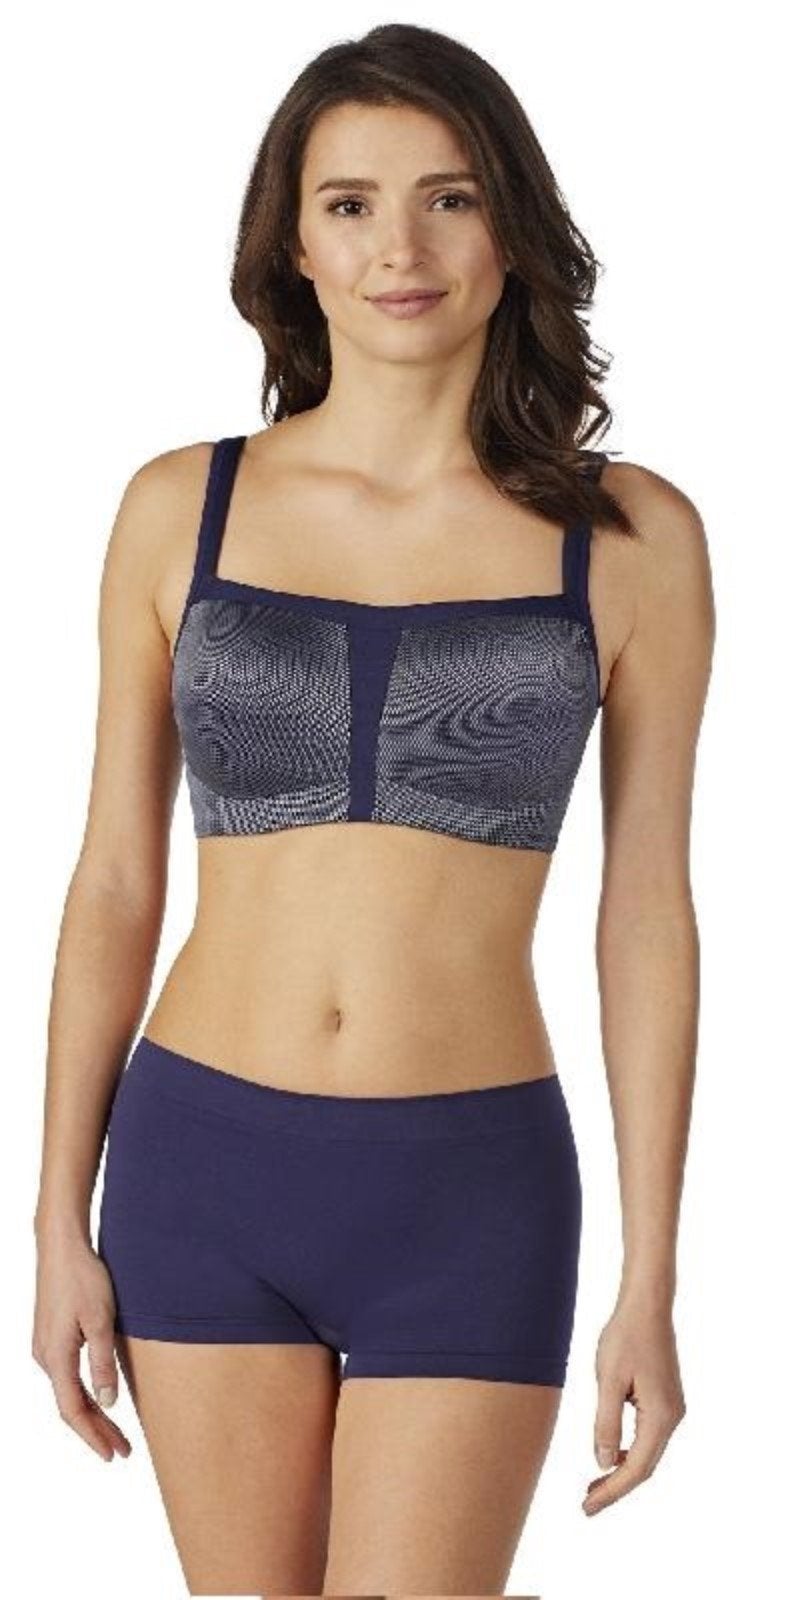 NEW Le Mystere 38D Hi Impact Full Support Underwire Sports Bra 920 Blue #74001